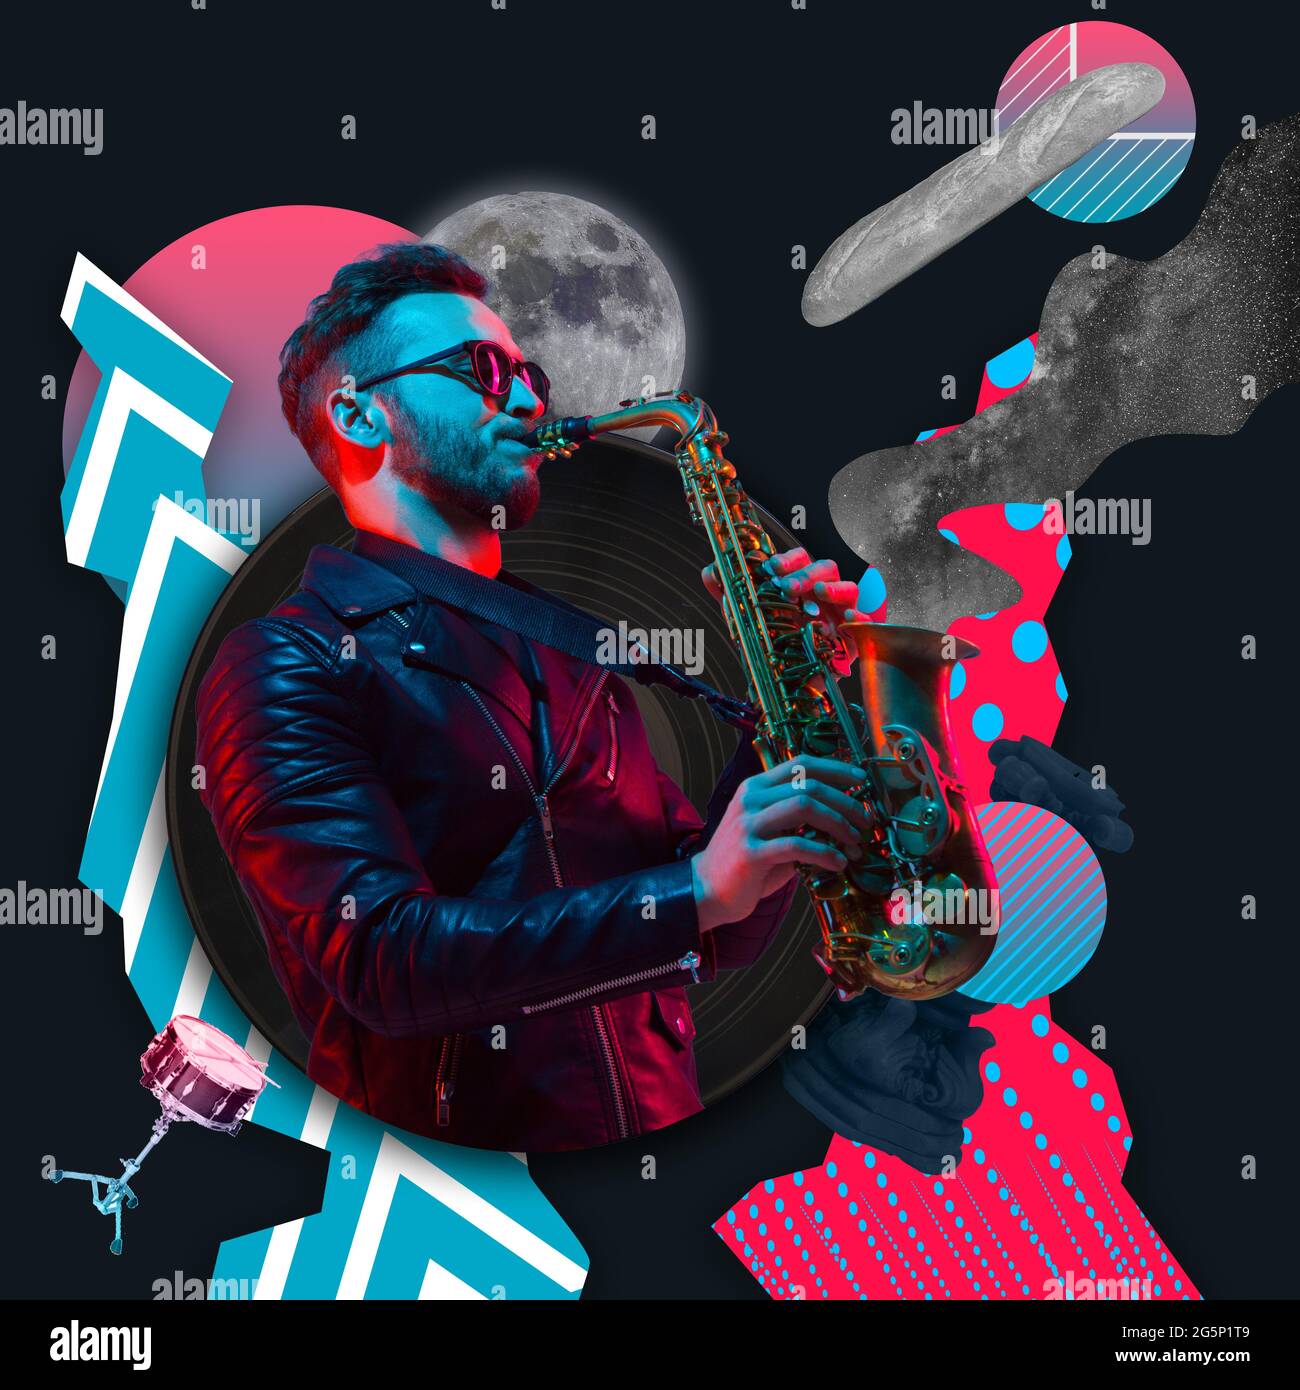 Young man playing saxophone isolated over black red blue abstract background. Contemporary art collage. Inspiration, idea, trendy urban magazine style Stock Photo